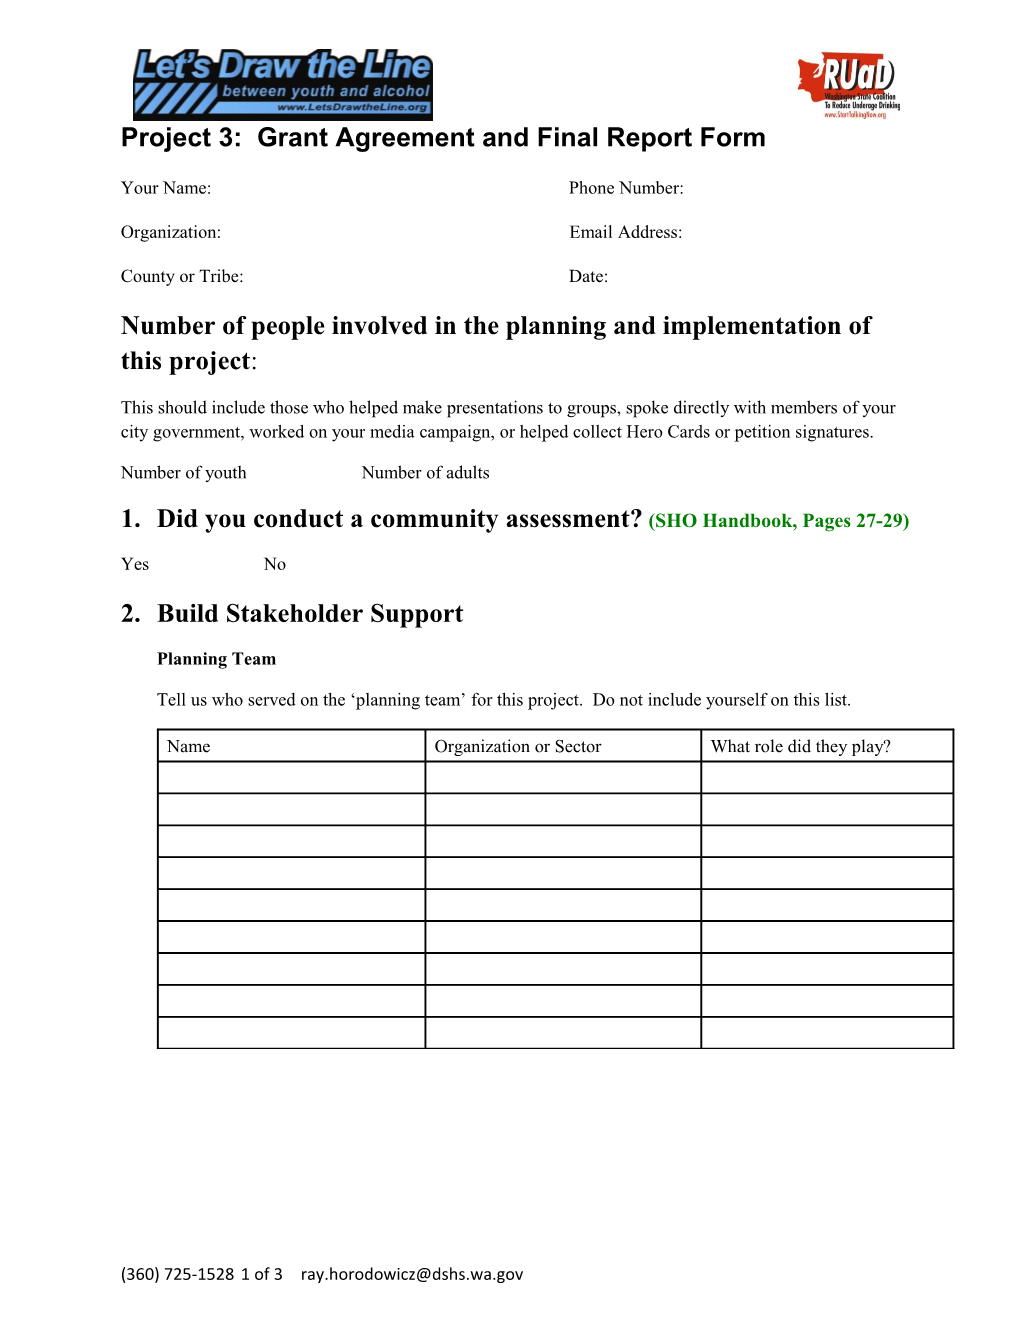 Project 3: Grant Agreement and Final Report Form